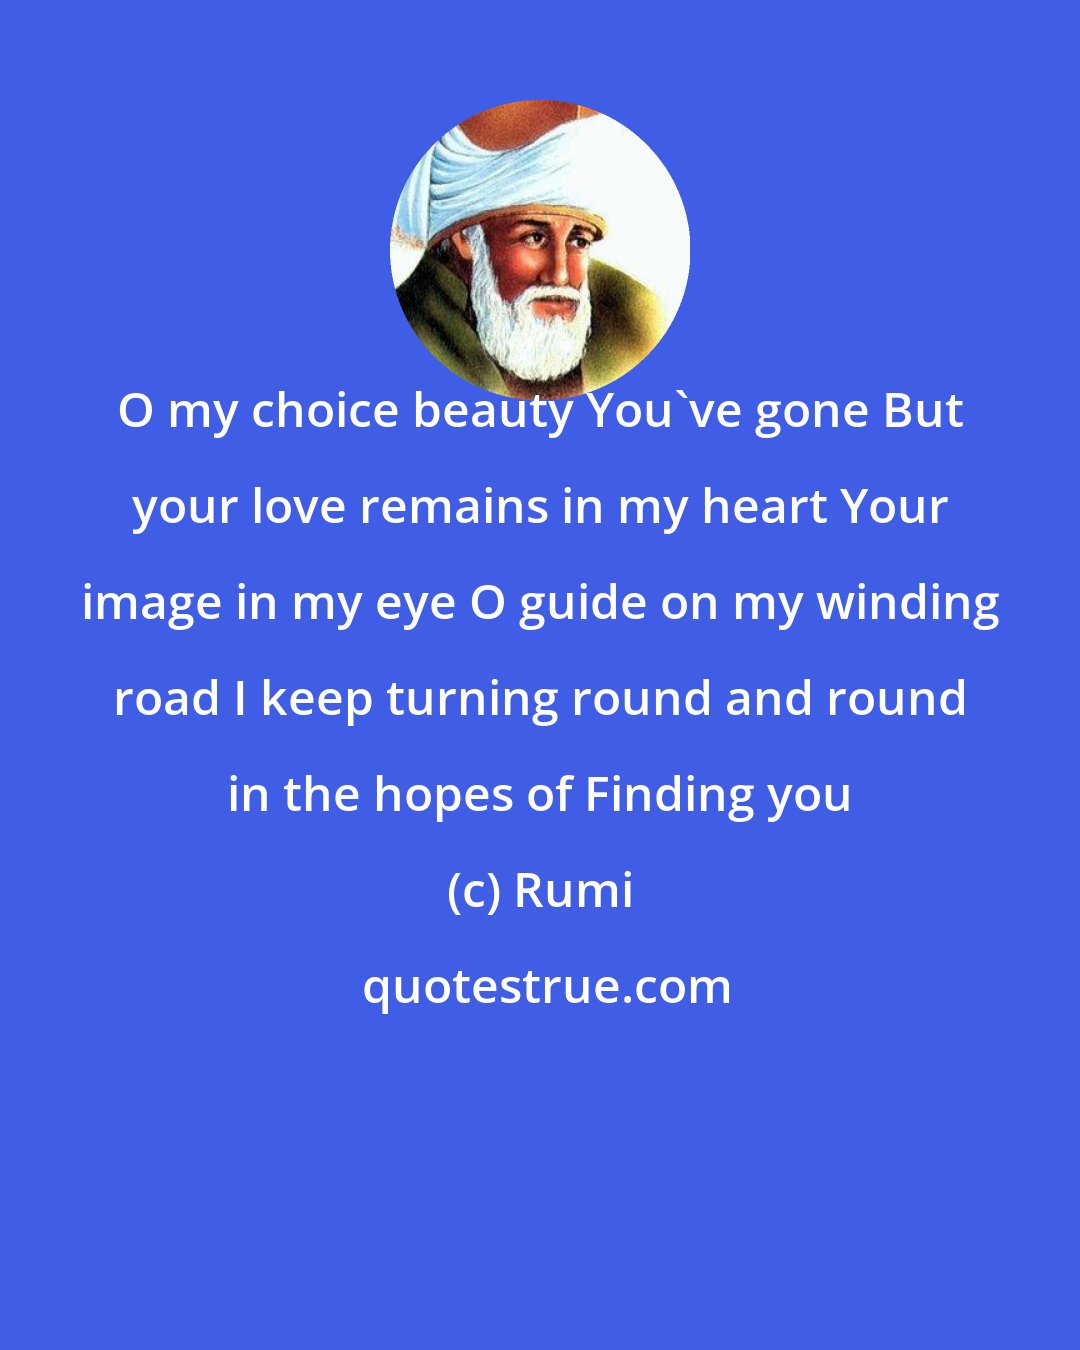 Rumi: O my choice beauty You've gone But your love remains in my heart Your image in my eye O guide on my winding road I keep turning round and round in the hopes of Finding you